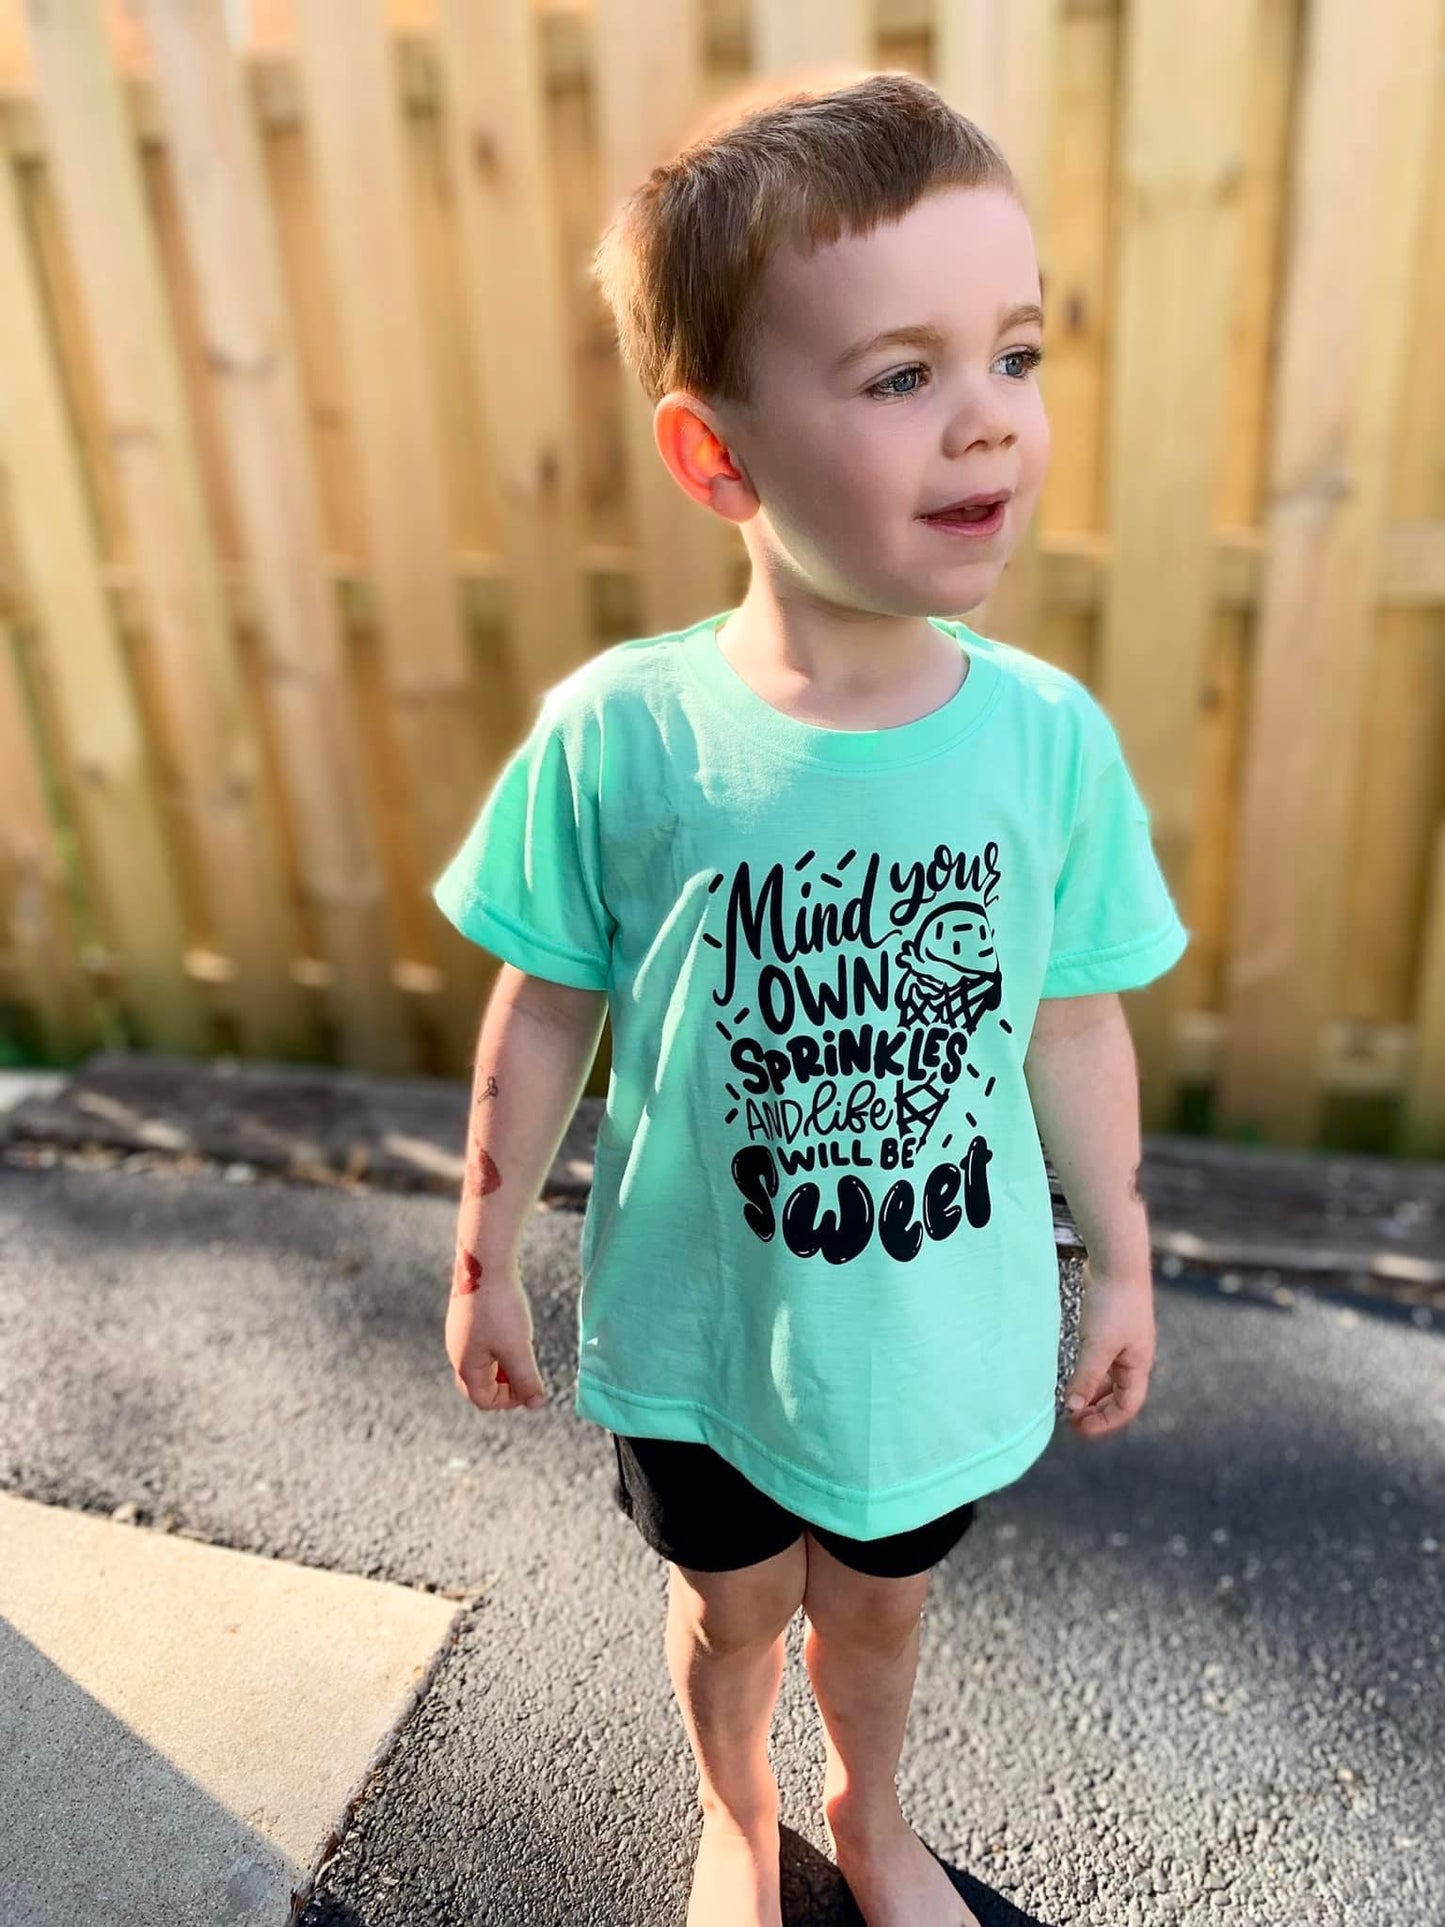 Mind Your Own Sprinkles and Life Will Be So Sweet Shirt